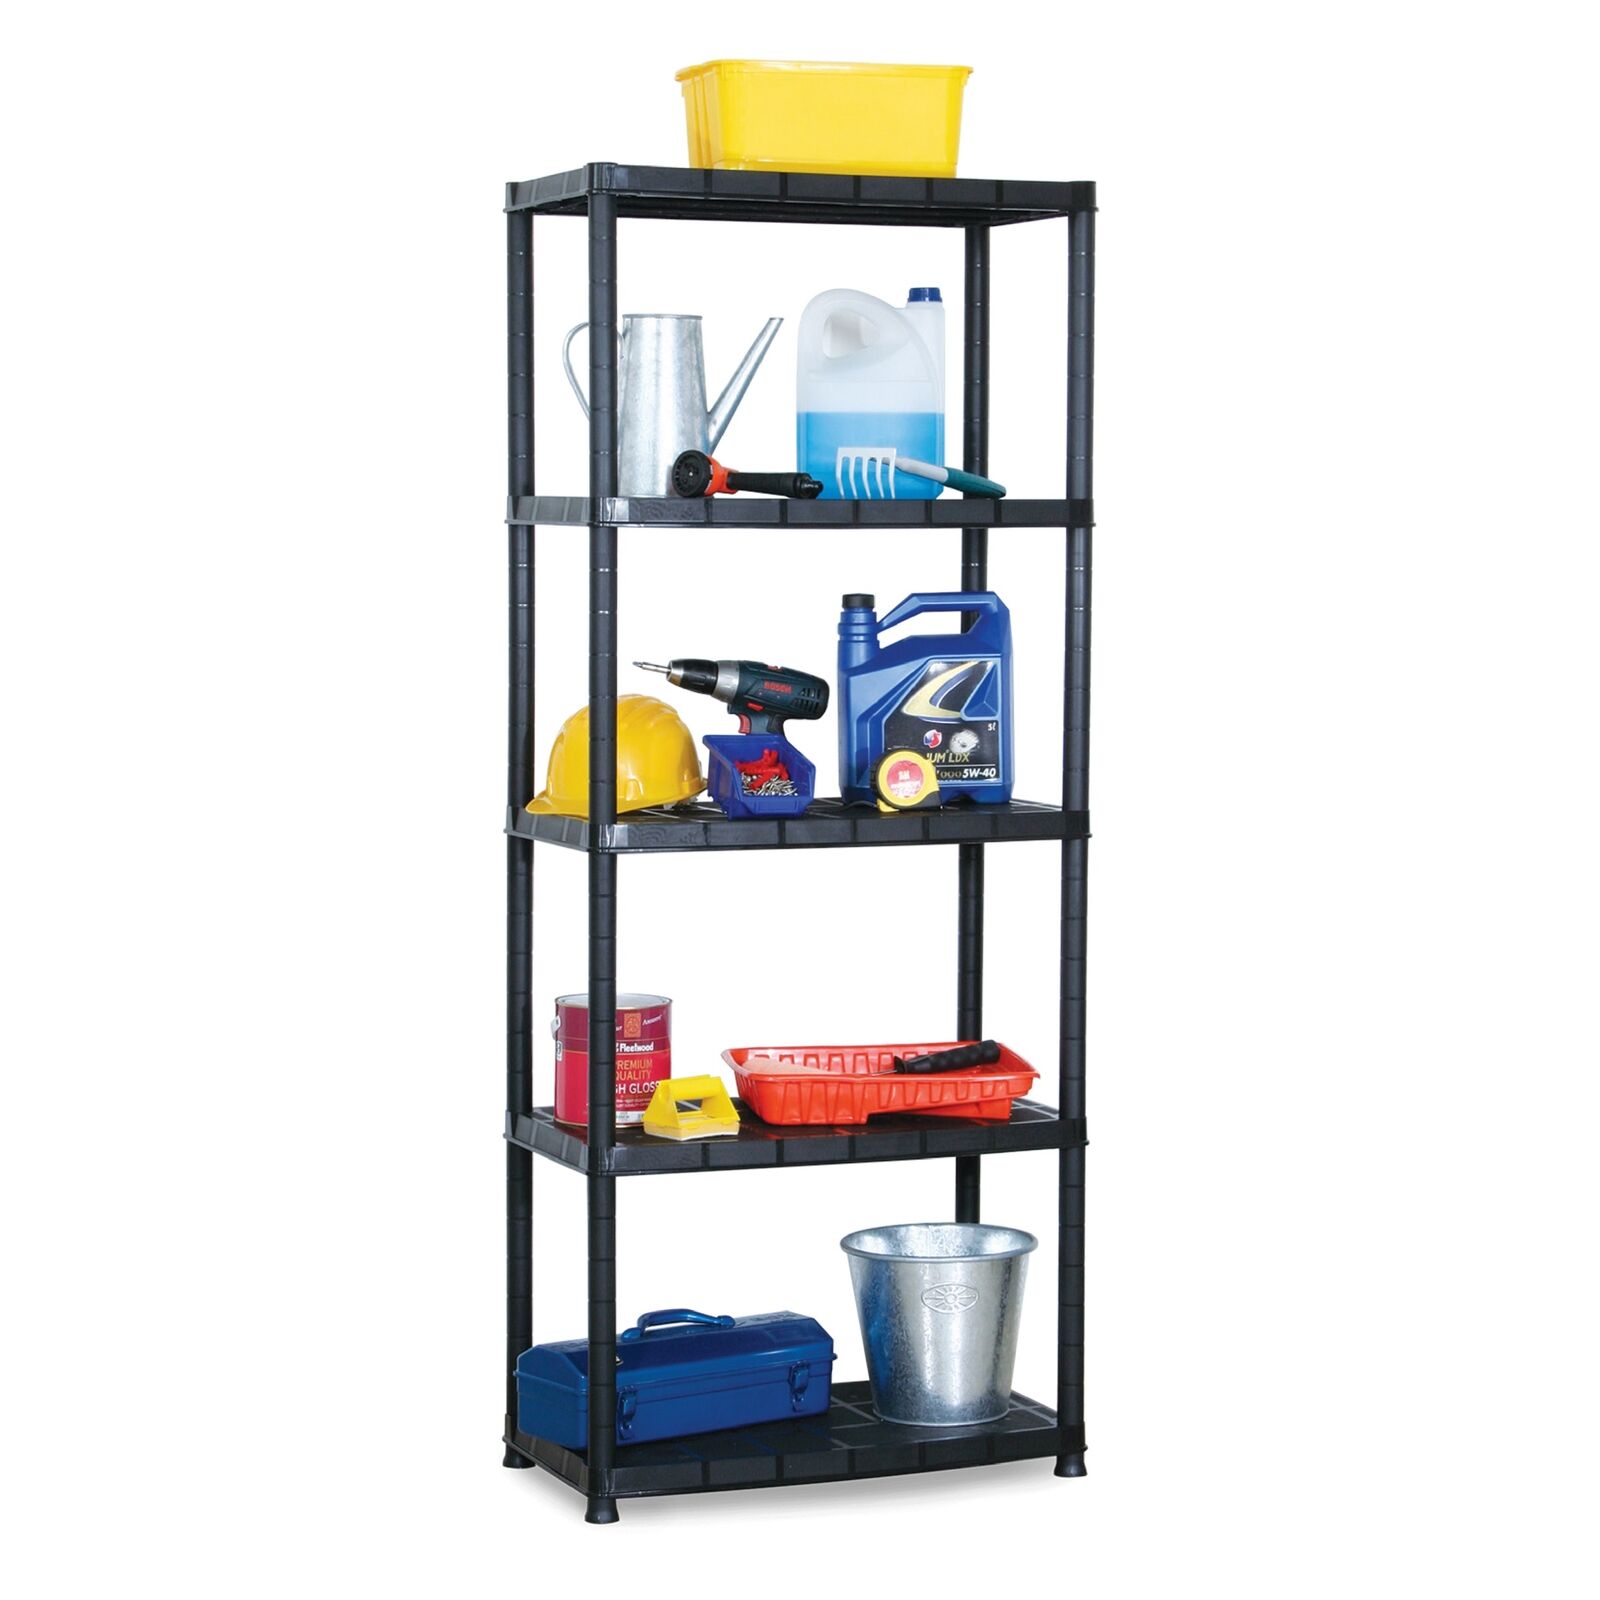 Ram Quality Products Platin 15 inch 5 Tier Plastic Storage Shelves, Black (Used)